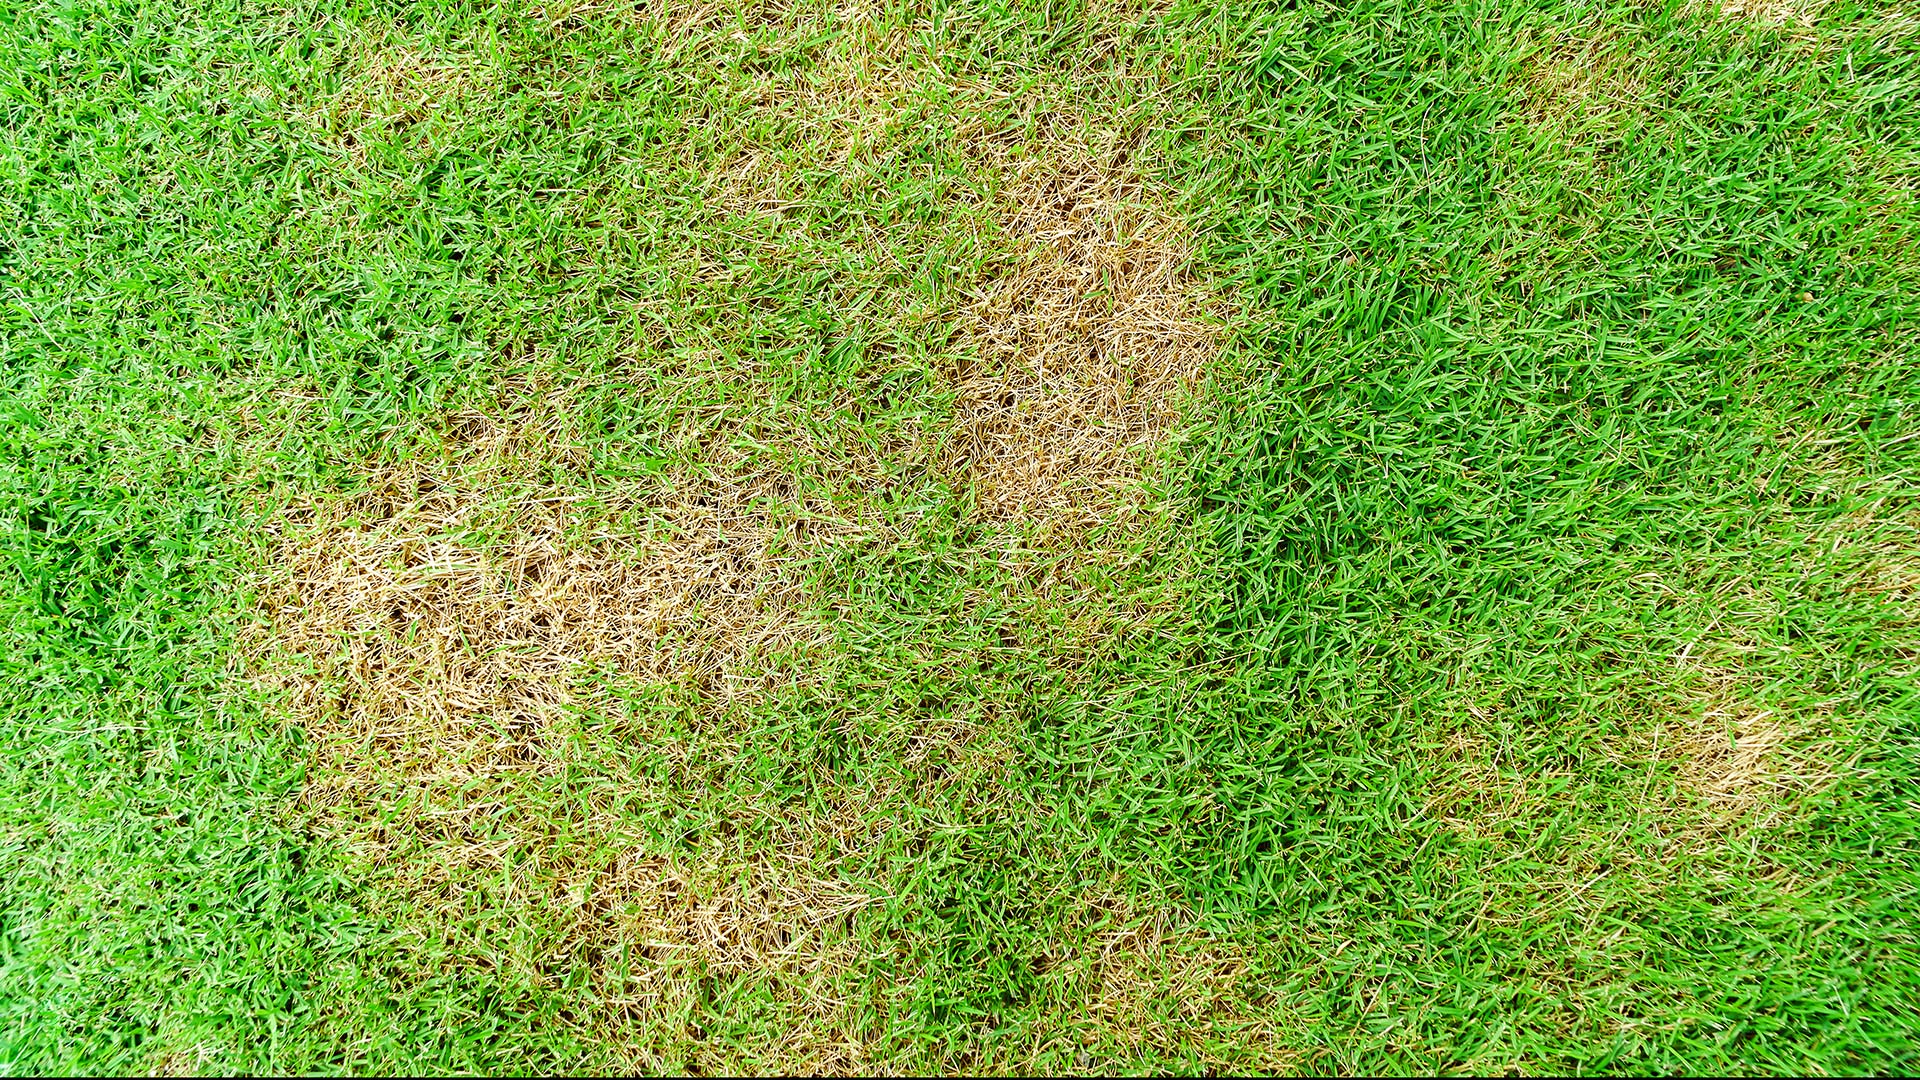 Does My Lawn Have Brown Patch Disease or Does It Just Need Water?